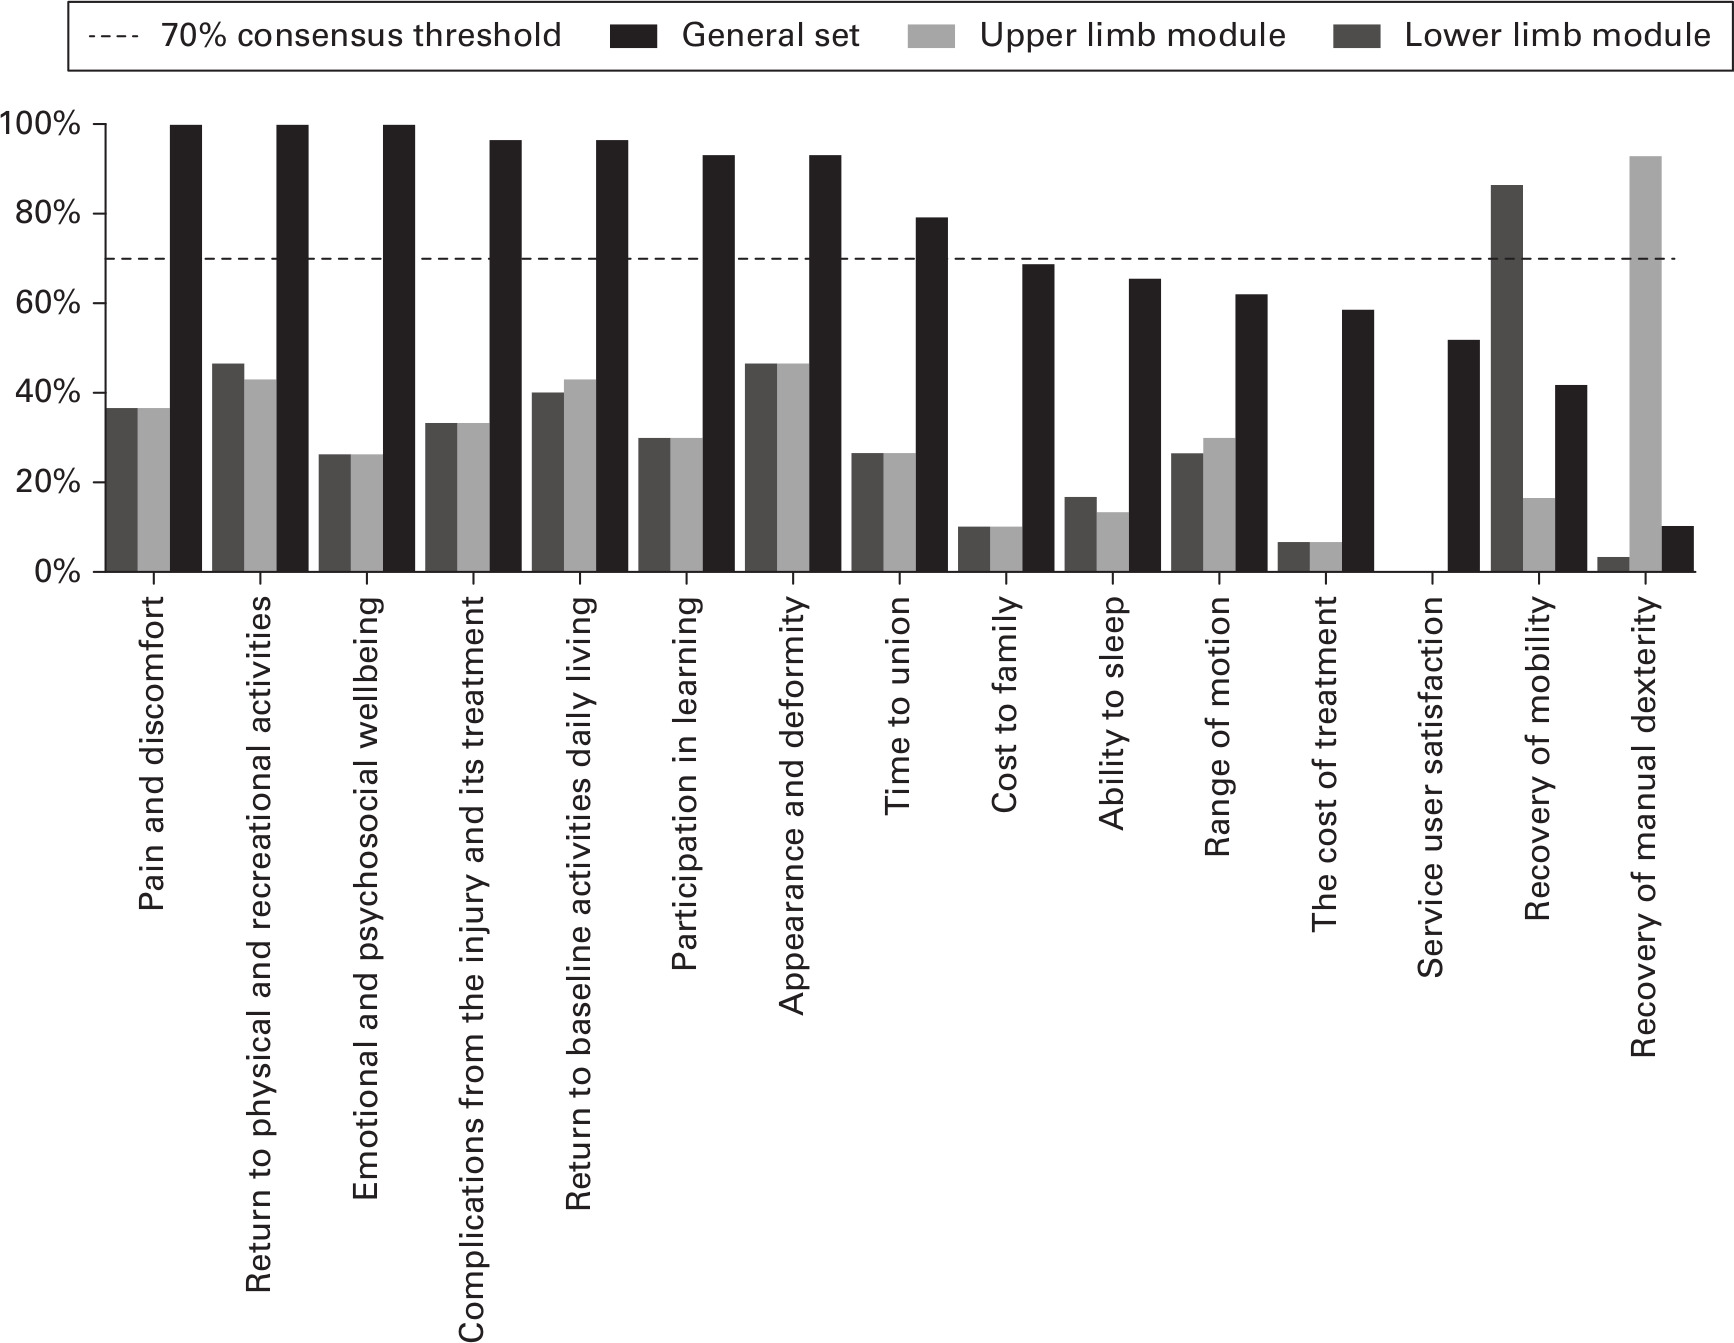 Fig. 2 
            Voting outcomes from consensus workshop identifying the general core outcome set for children’s fractures and the upper and lower limb modules, ordered left to right by percentage voting for the score to be included in the general set of core outcome domains.
          